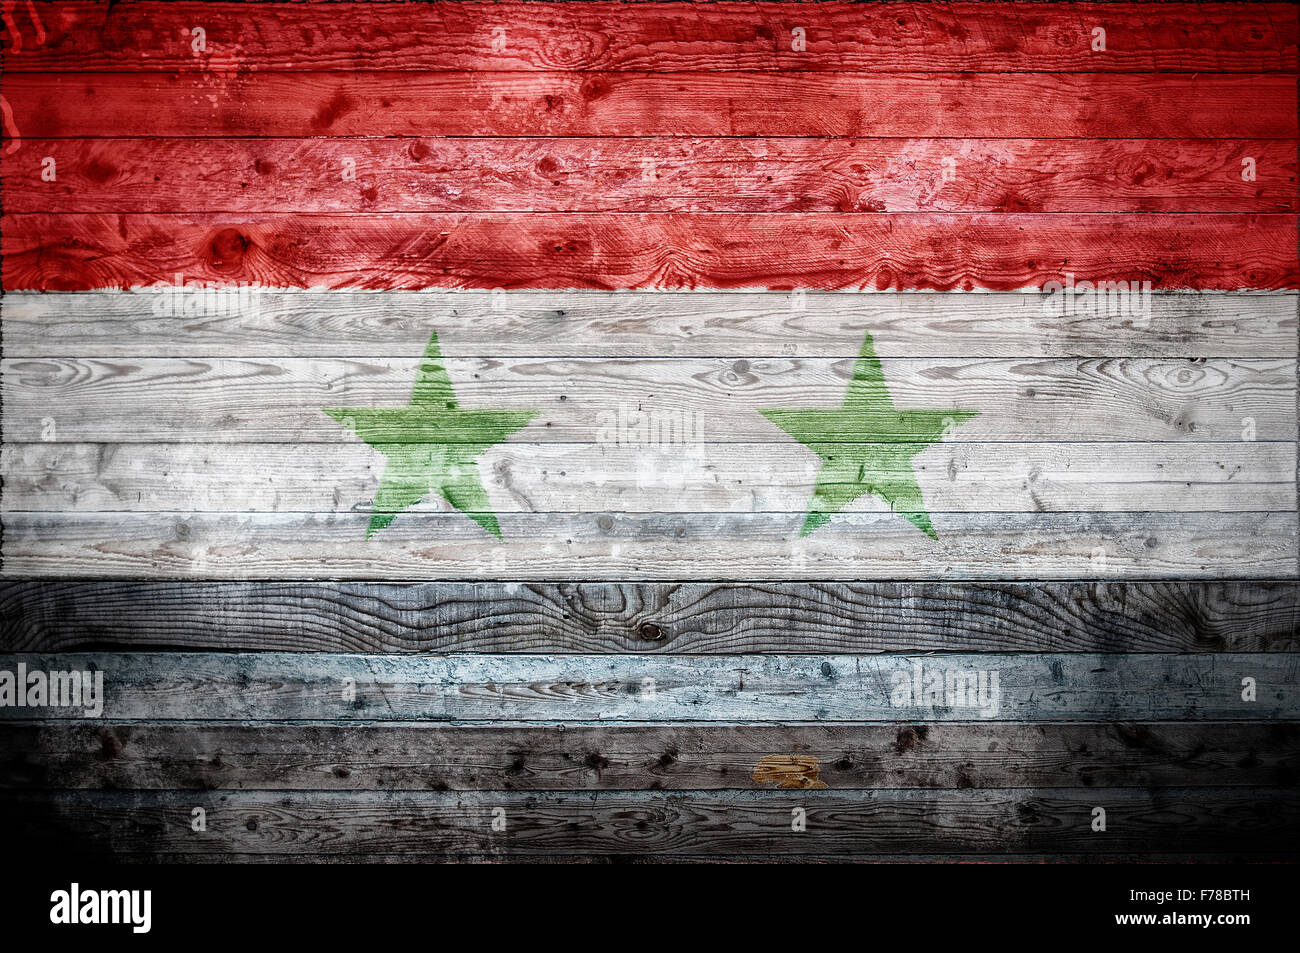 A vignetted background image of the flag of Syria onto wooden boards of a wall or floor. Stock Photo